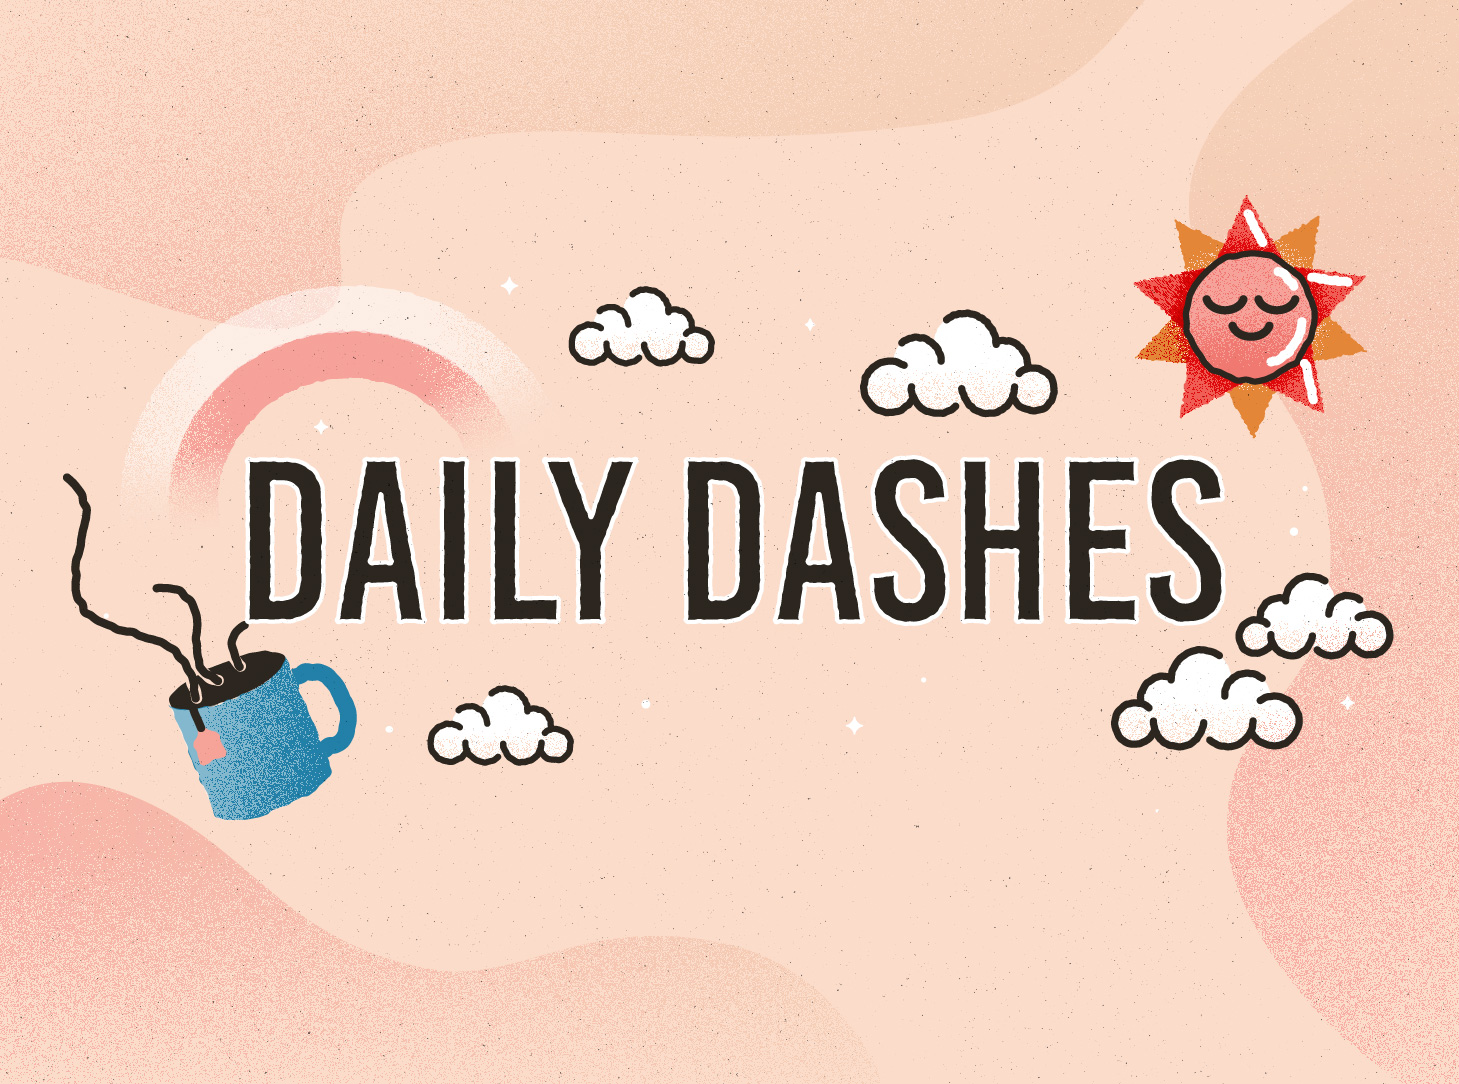 Daily Dashes